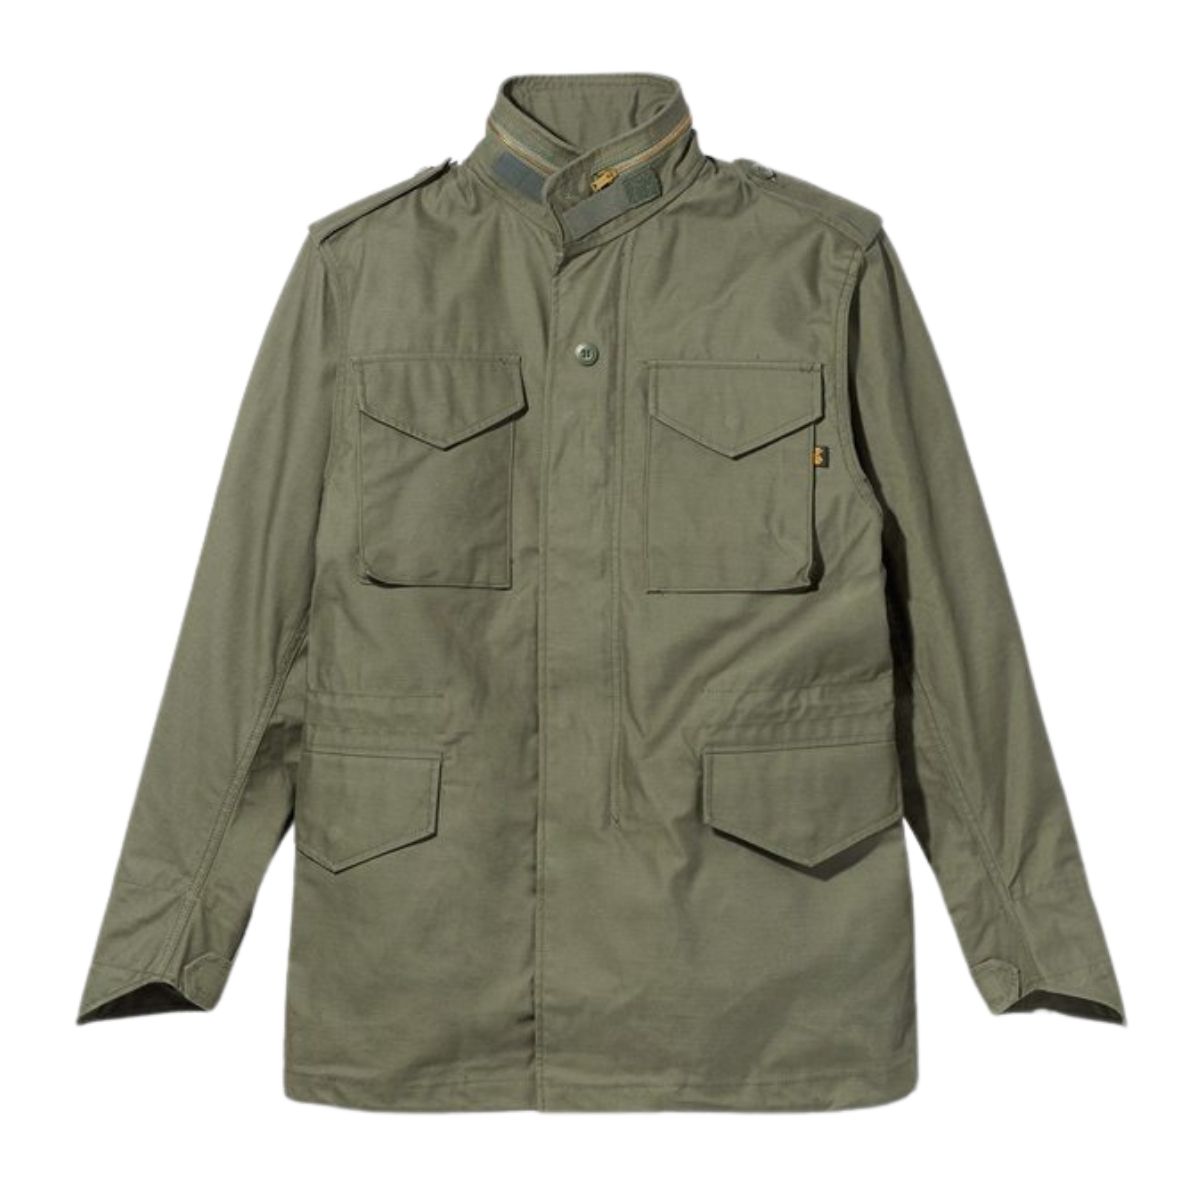 A History Of The M-65 Field Jacket, Plus 5 Of Our Favorite Field ...